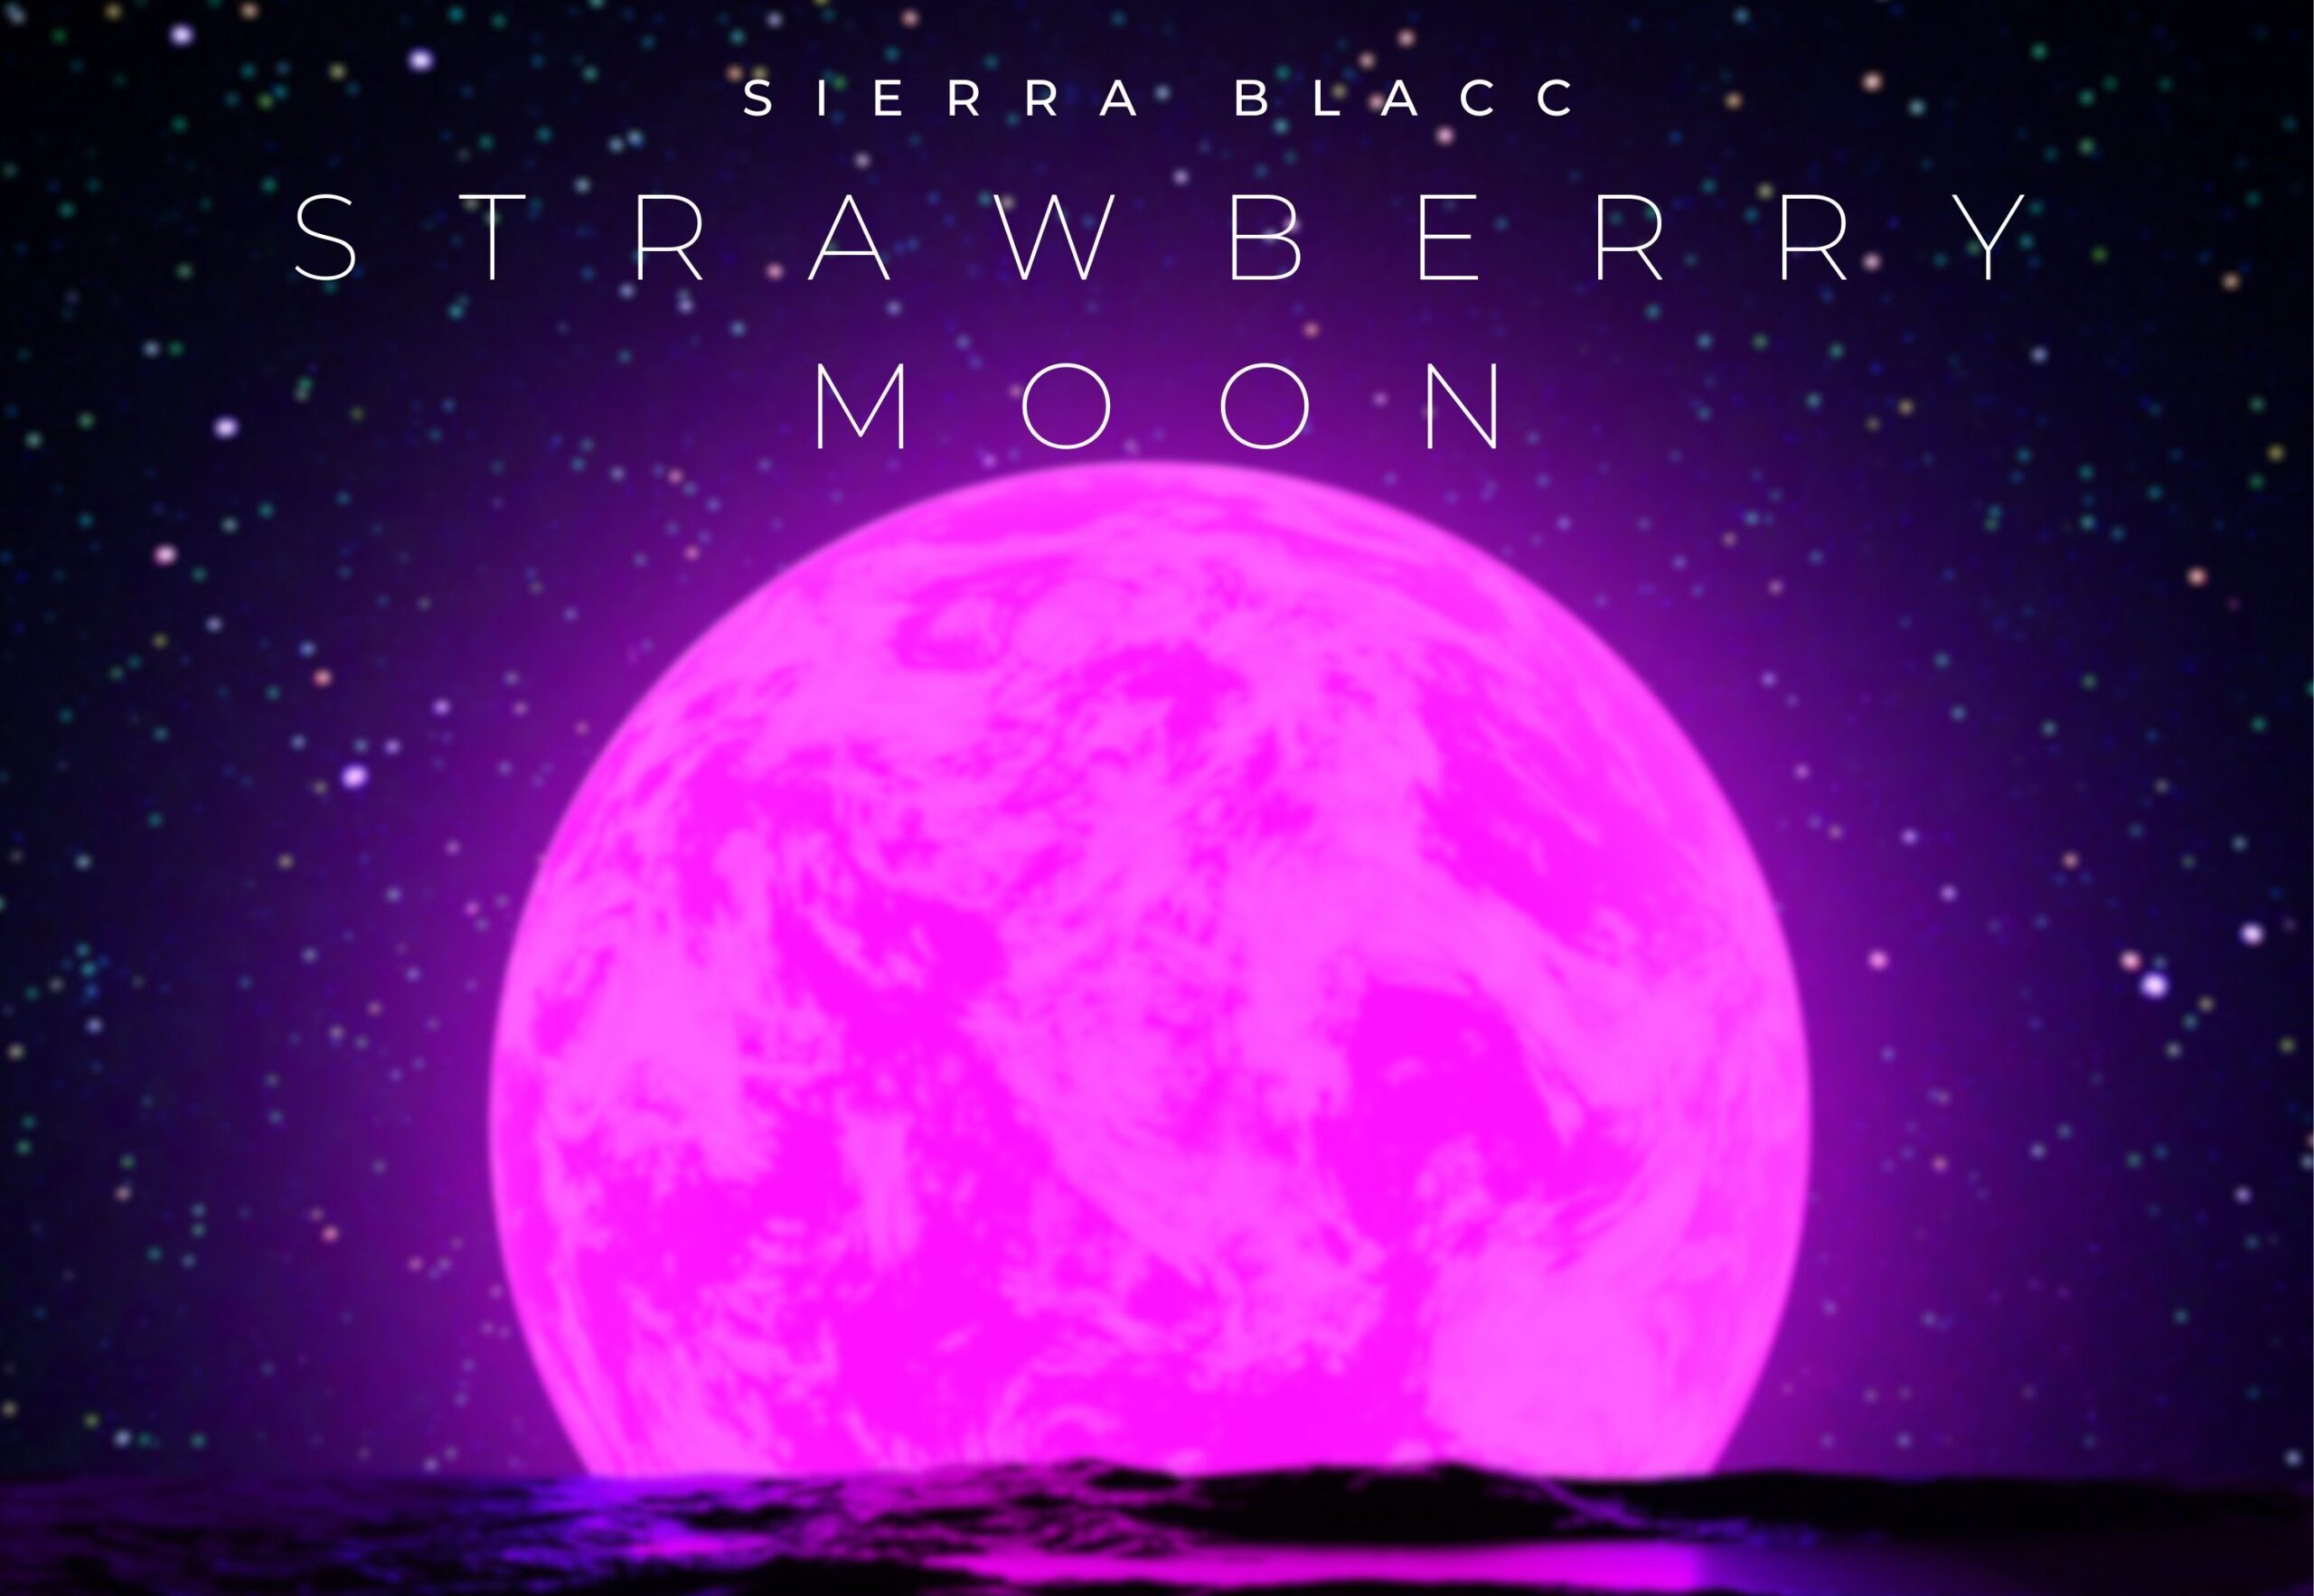 Sierra Blacc's Enchanting Single "Strawberry Moon" Illuminates the Night with Electronica Melodies